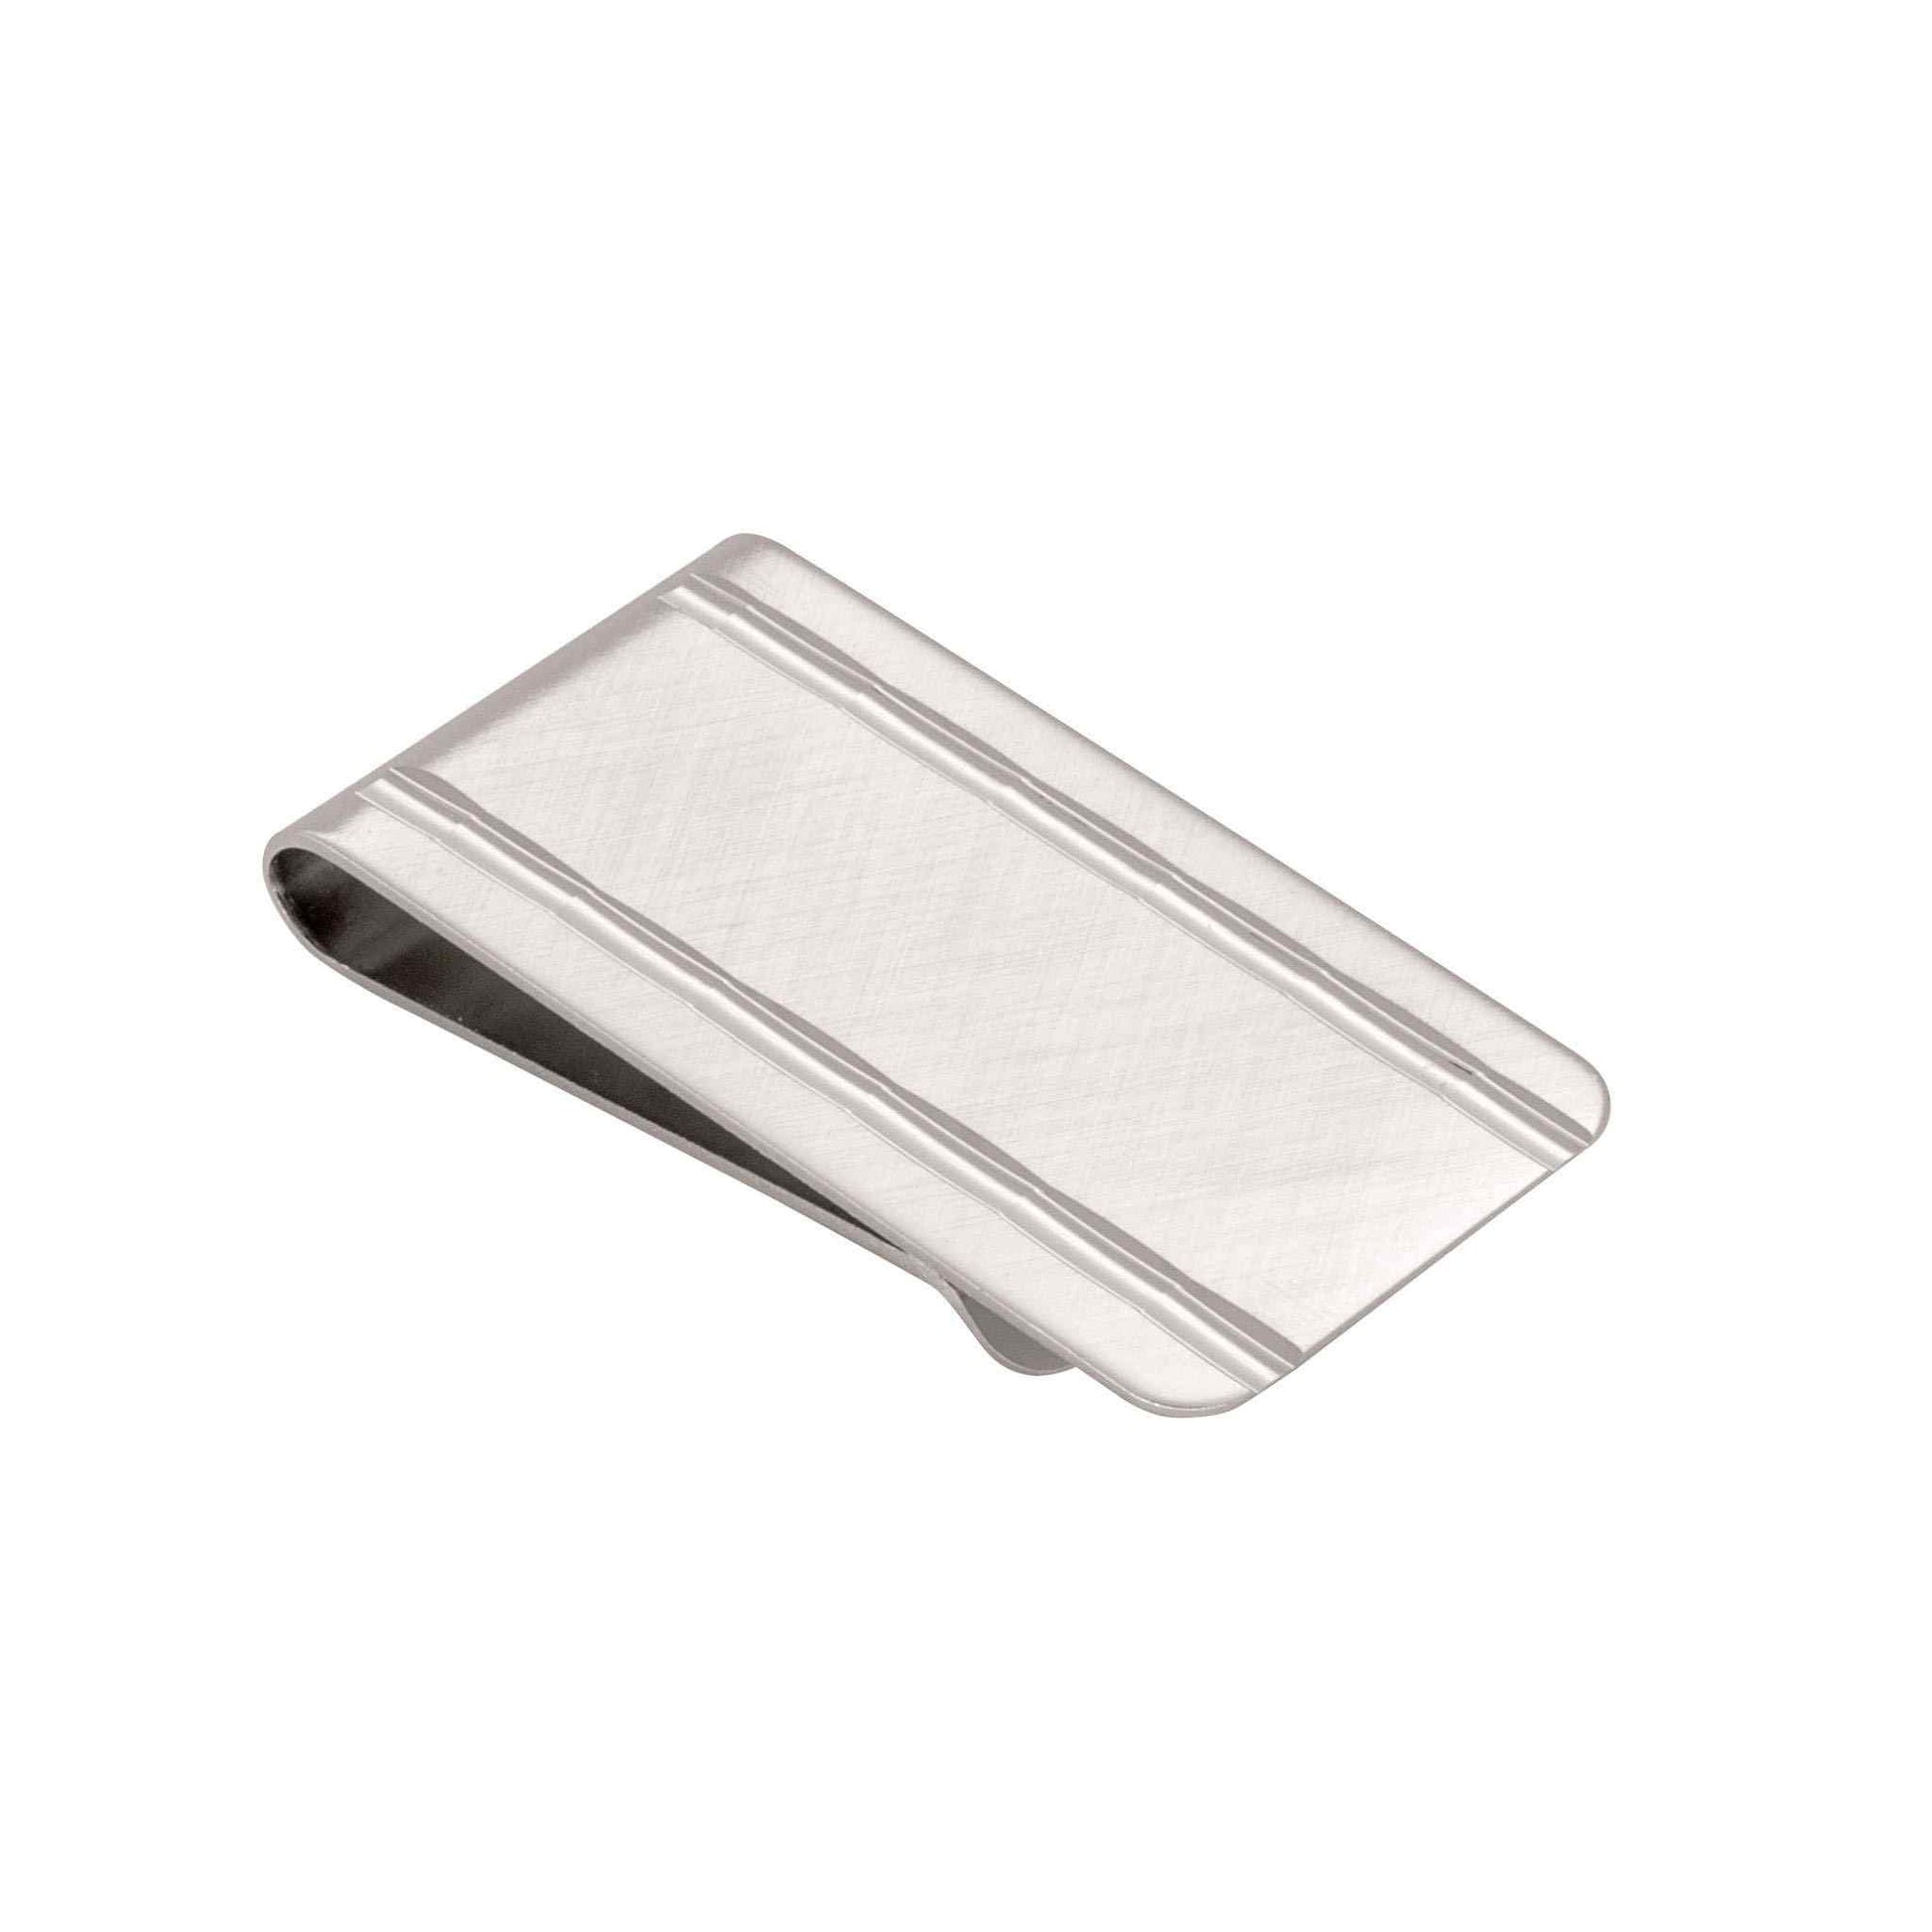 A florentine finish money clip displayed on a neutral white background.